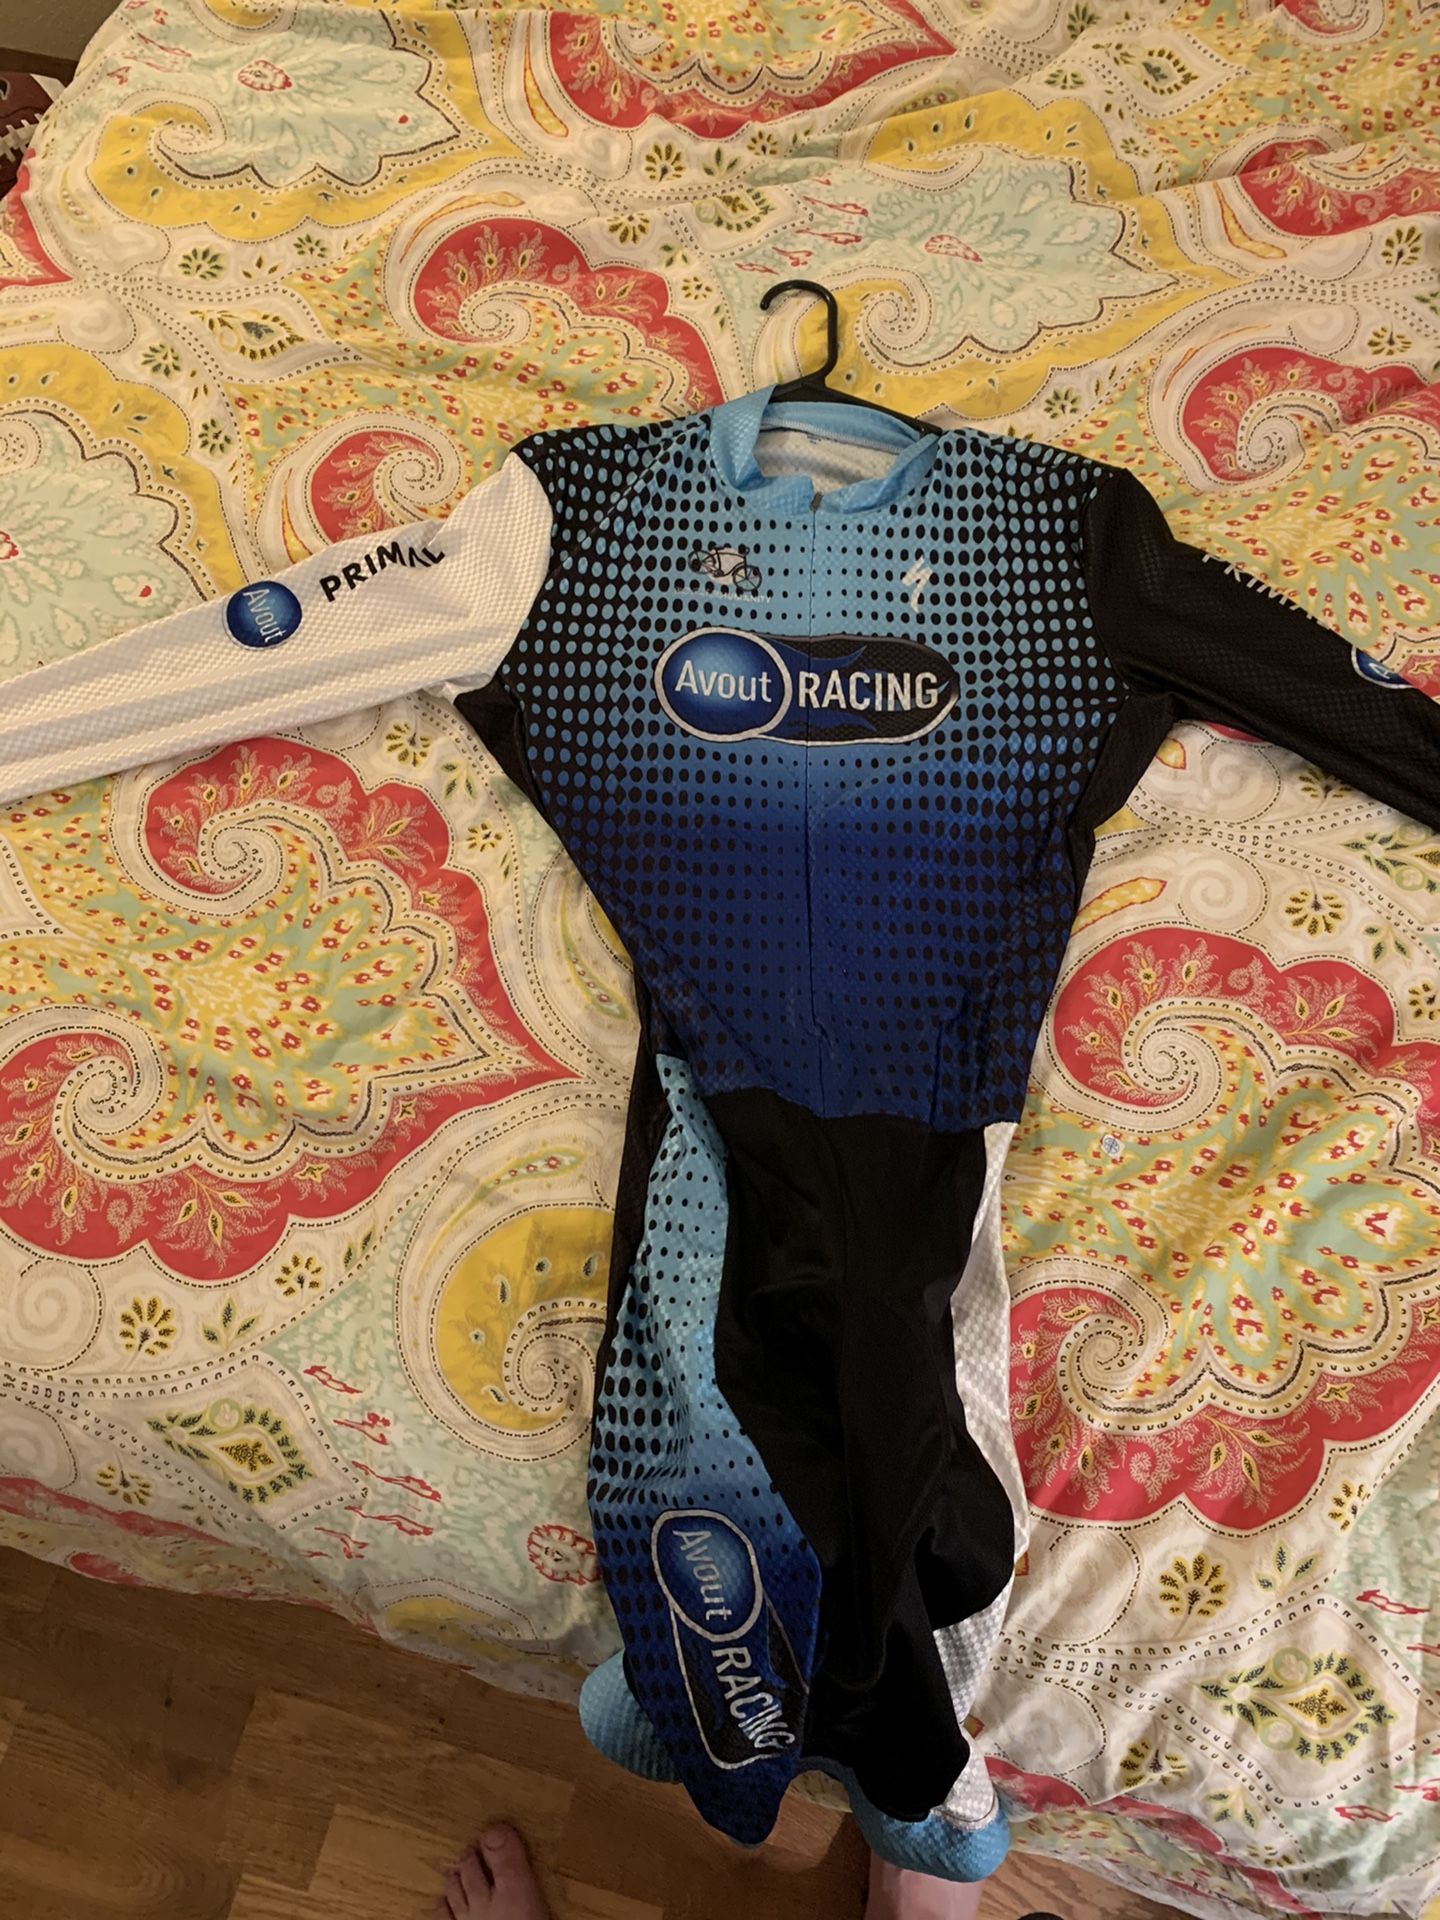 Primal Cycling Jersey/One piece cycling Suit w butt pad men's size XL